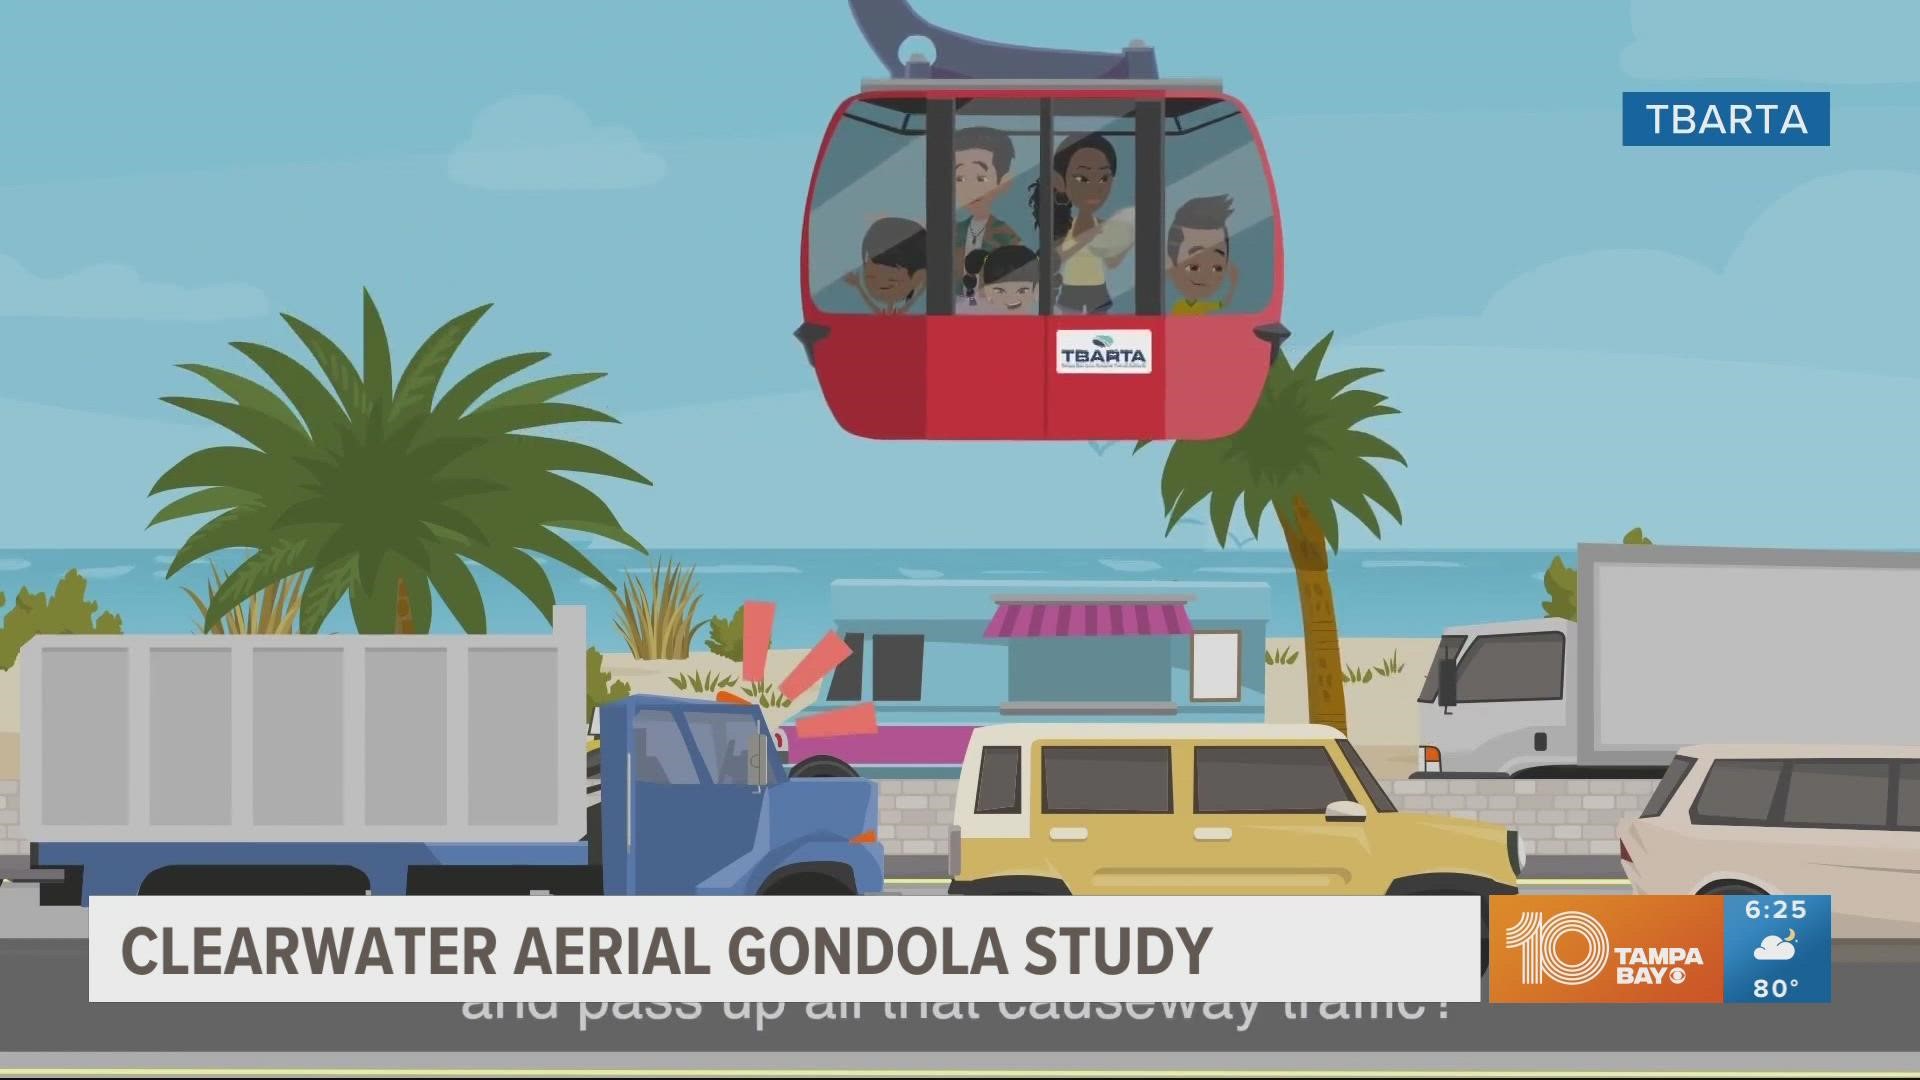 The Tampa Bay Regional Transit Authority is studying the possibility of using an aerial gondola to connect people between downtown Clearwater and Clearwater Beach.